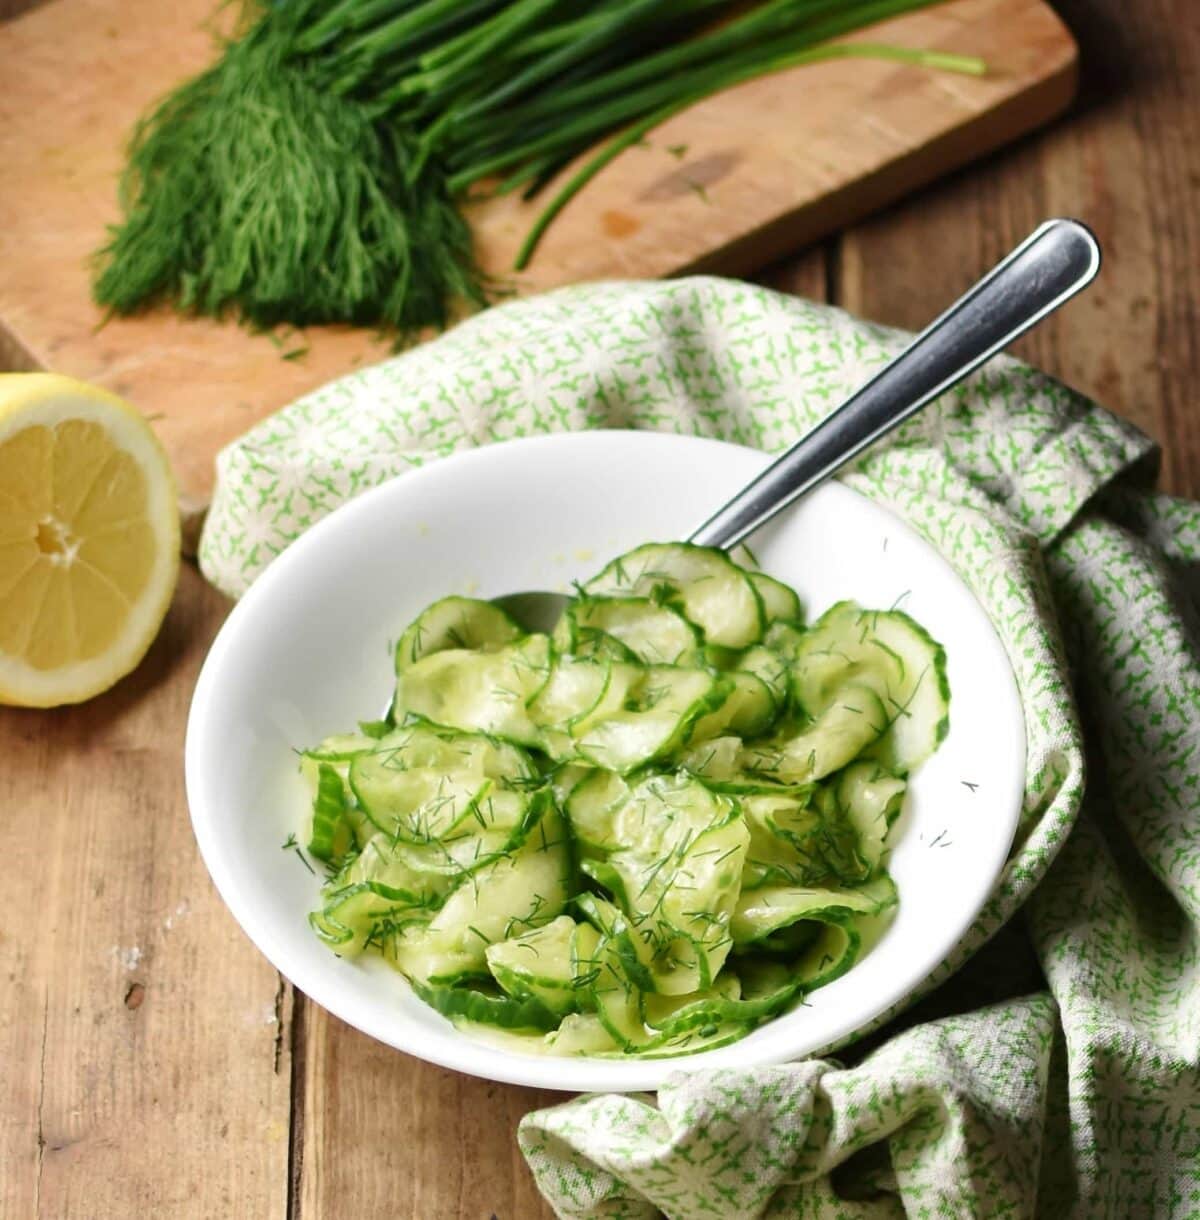 Cucumber salad with spoon in white bowl wrapped in green cloth with lemon and herbs in background.